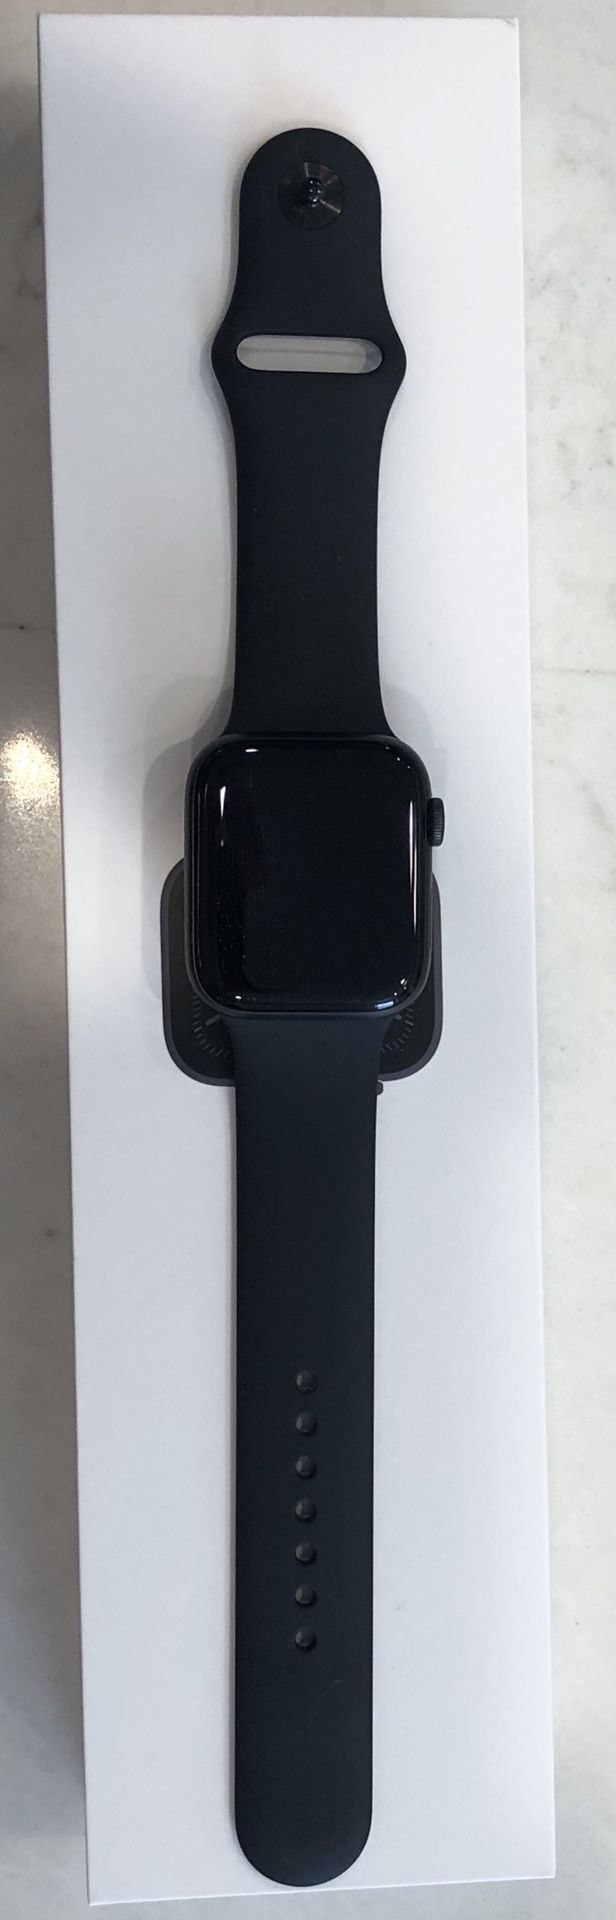 Apple Watch Series 5 GPS + Cellular, 44mm Space Gray Aluminum Case with Black Sport band